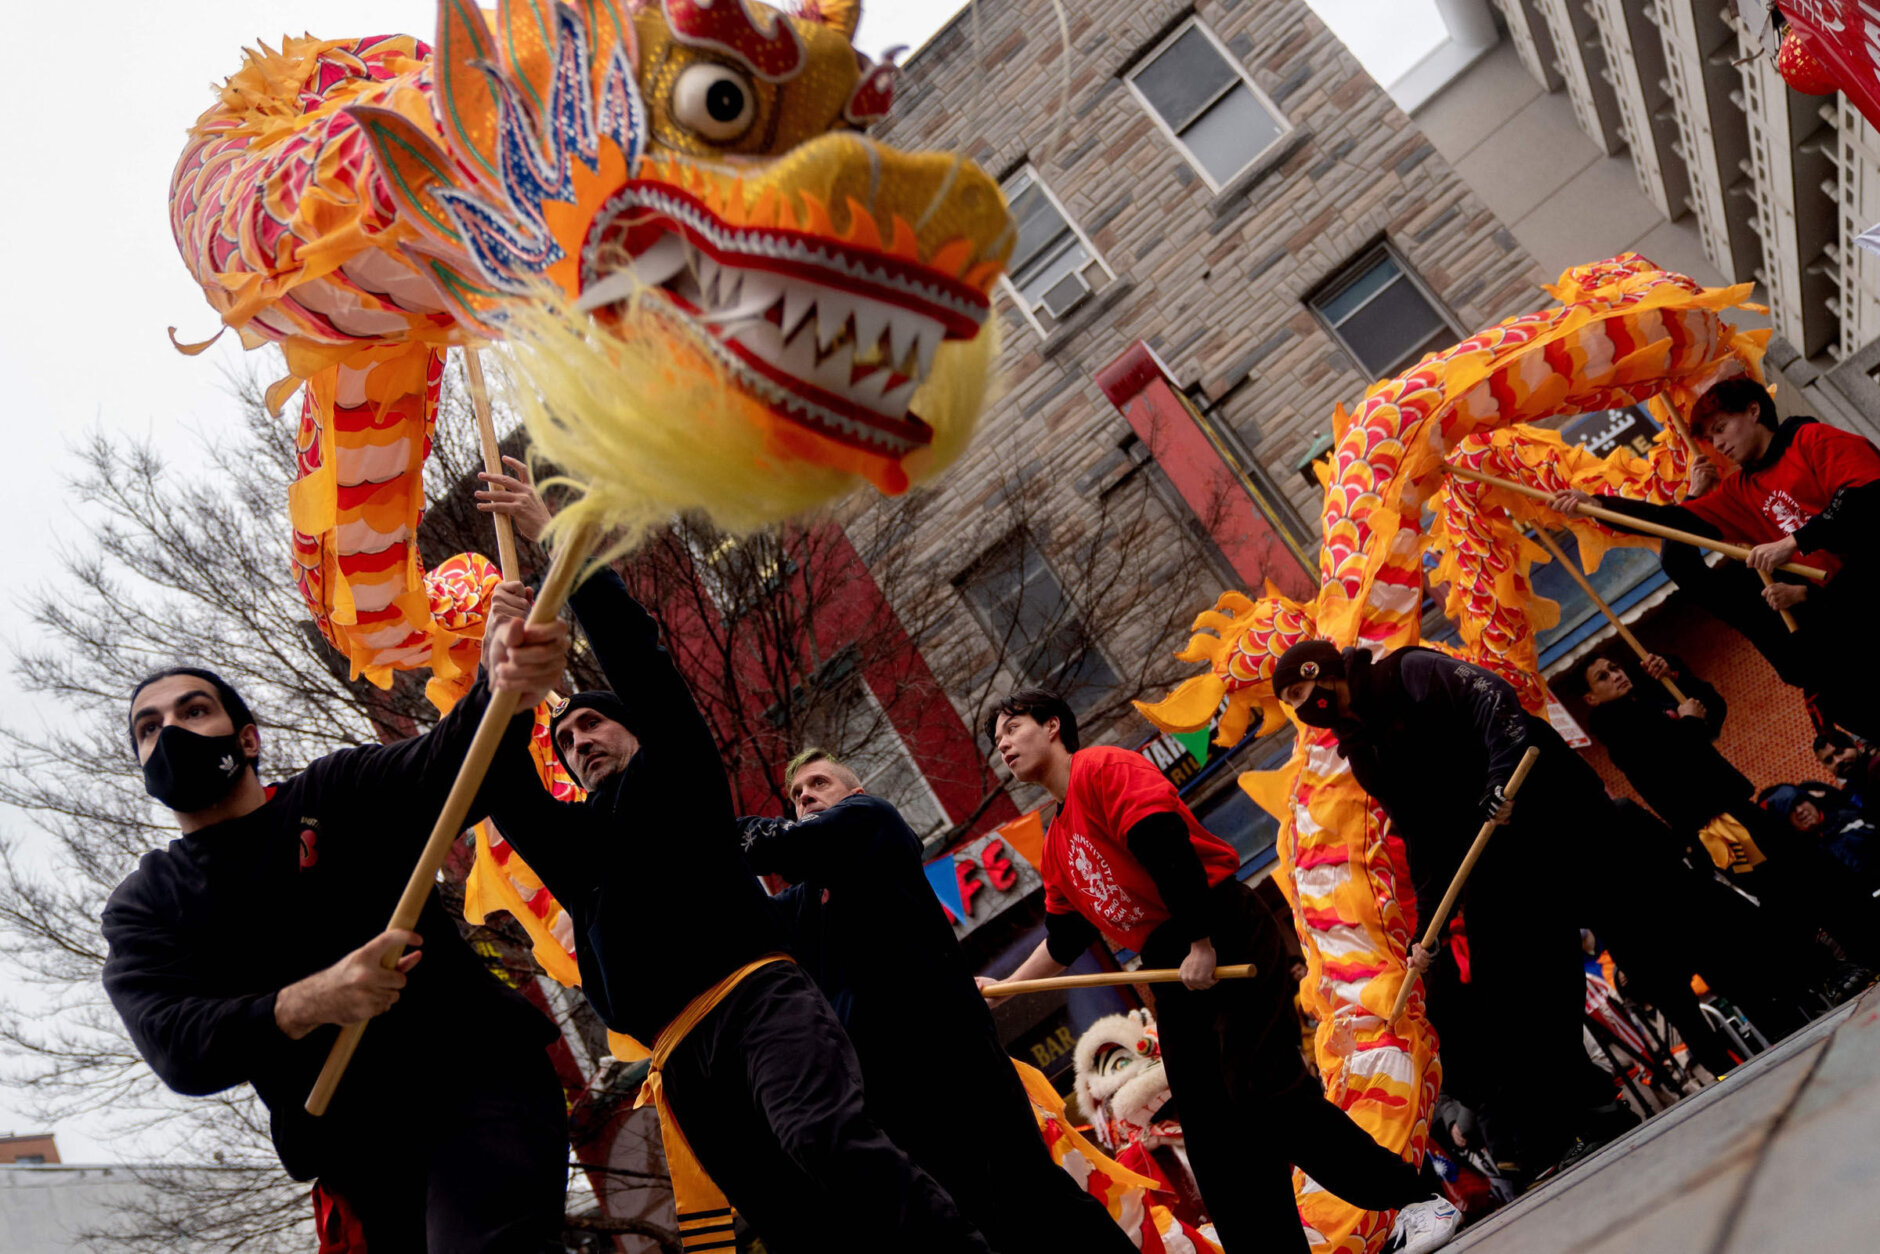 Performers dance on stage following the Lunar New Year Parade in the Chinatown neighborhood of Washington, DC, on January 22, 2023. - 2023 is the year of the rabbit in the Chinese horoscope. (Photo by Stefani Reynolds / AFP) (Photo by STEFANI REYNOLDS/AFP via Getty Images)